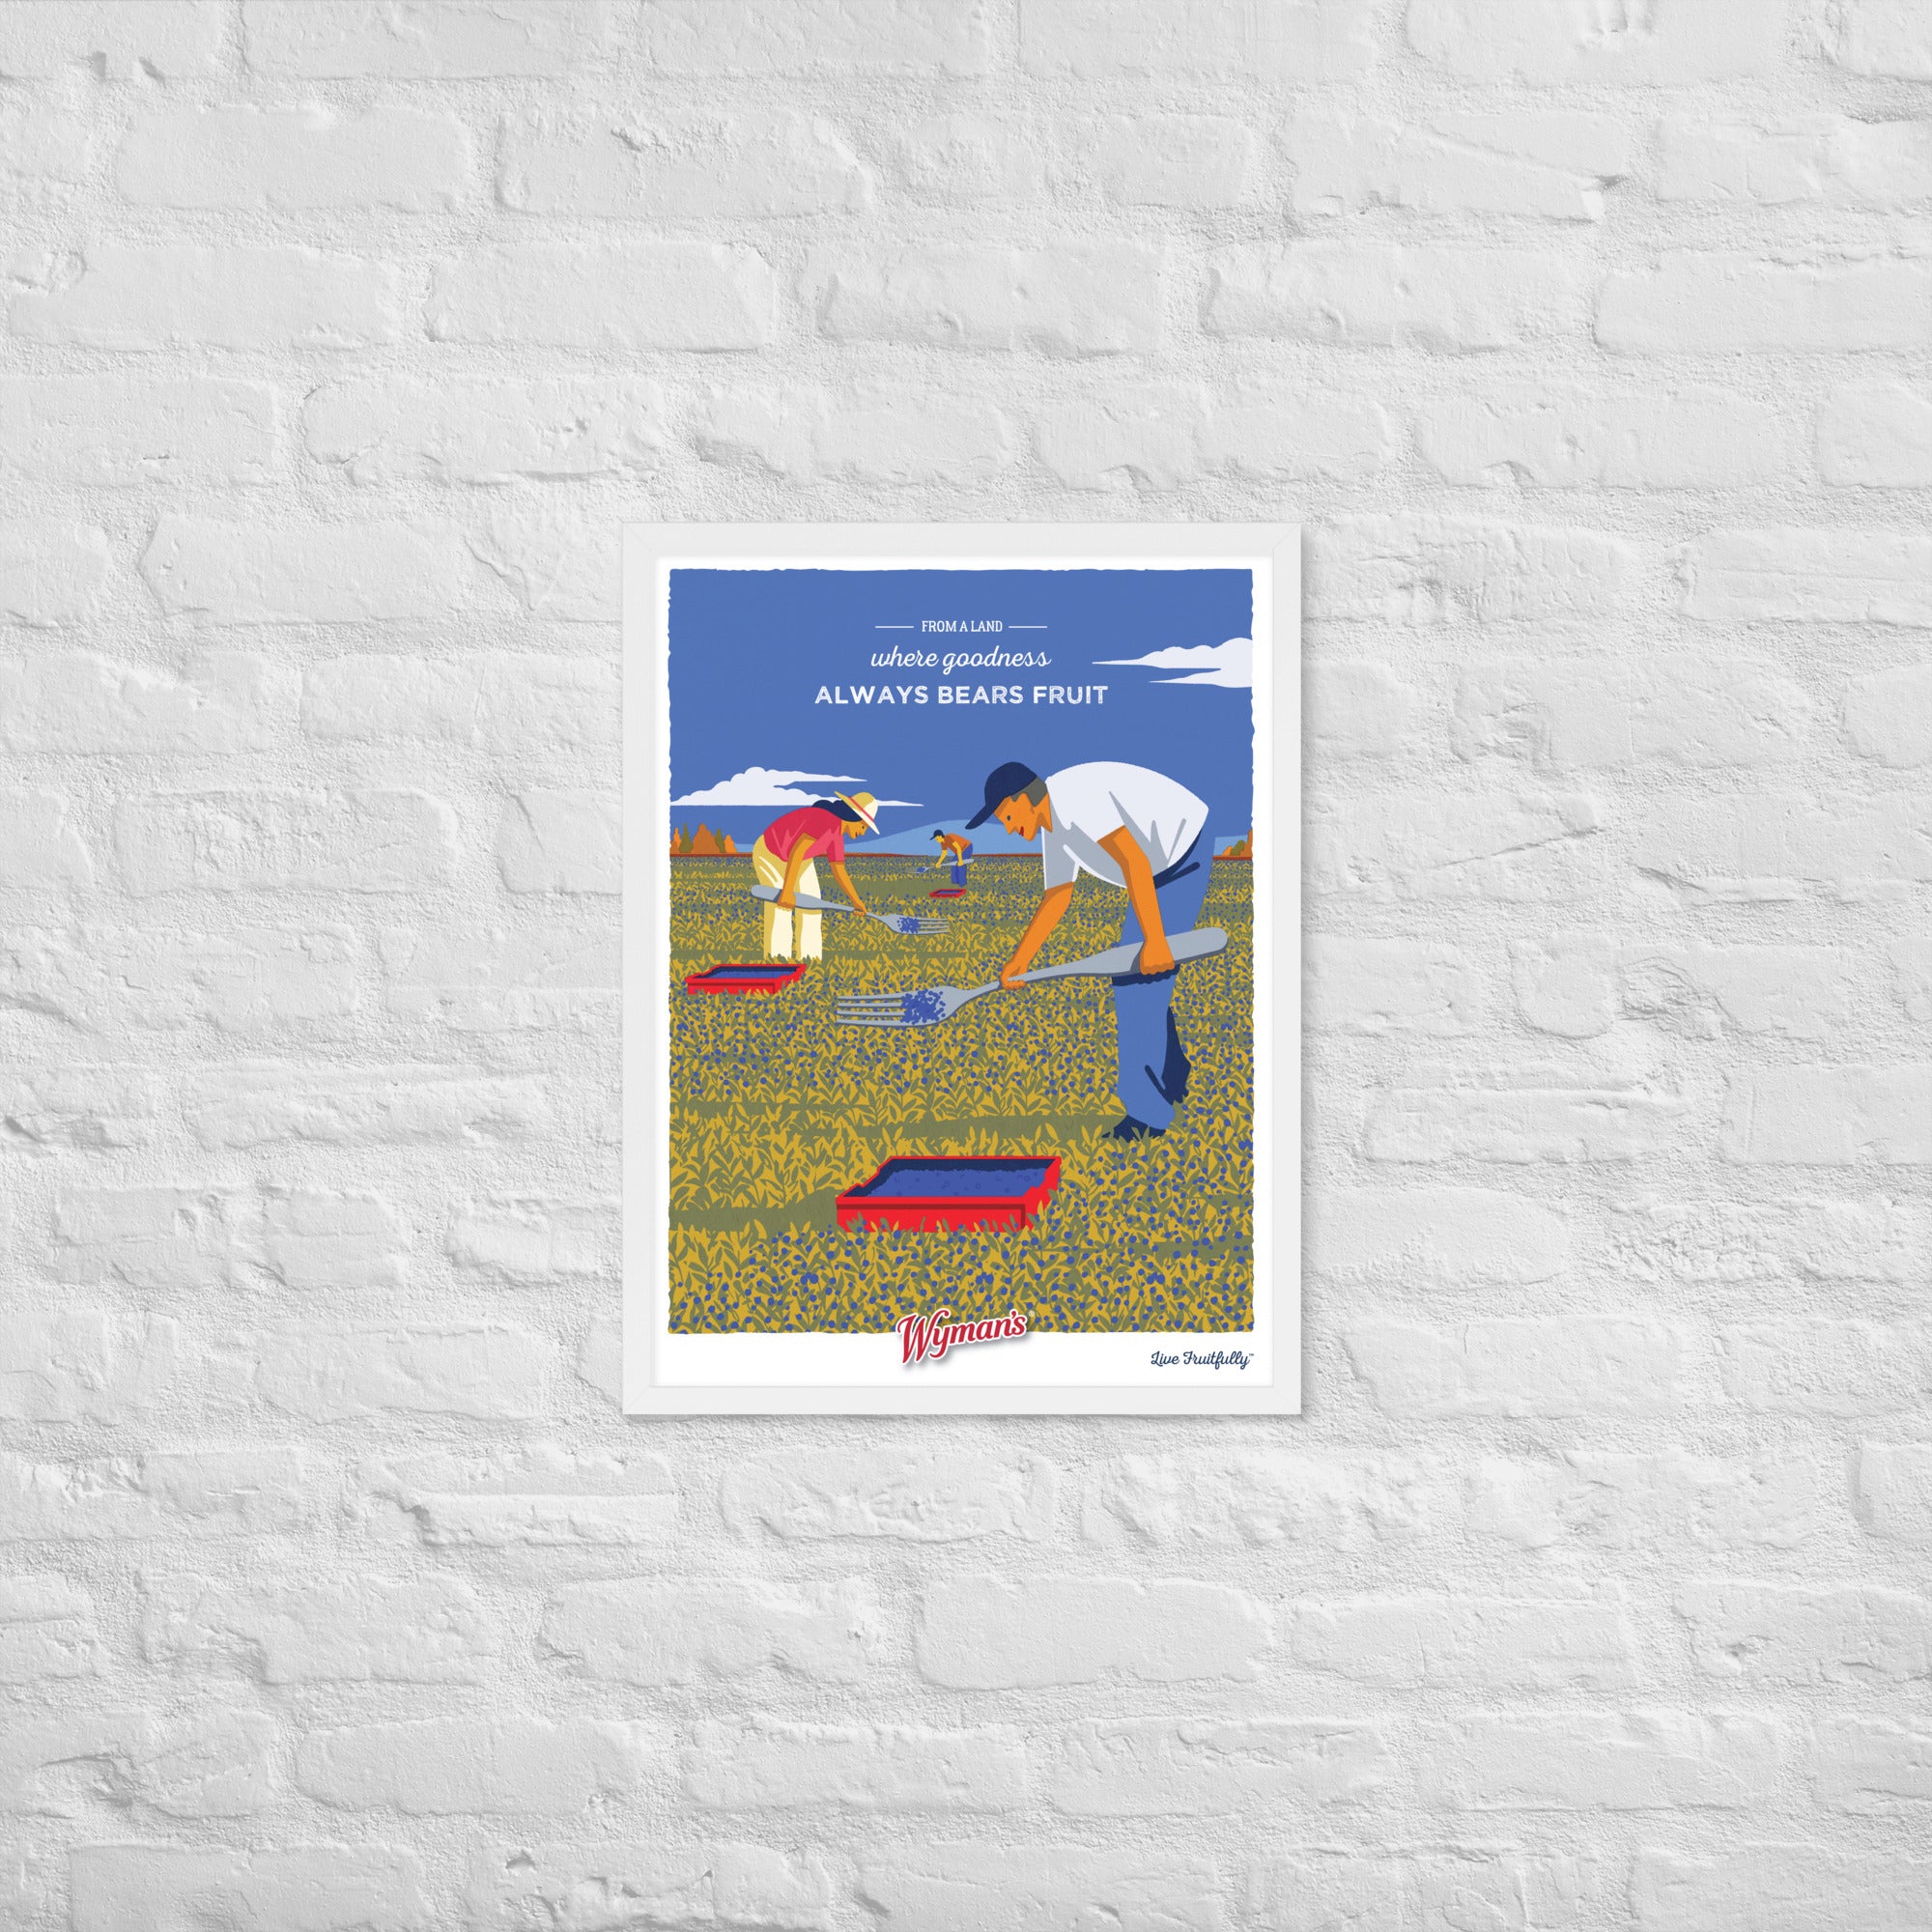 A brick wall with a printing of a From a Land Where Goodness Always Bears Fruit Poster by Shop Wyman's of a man in a field.